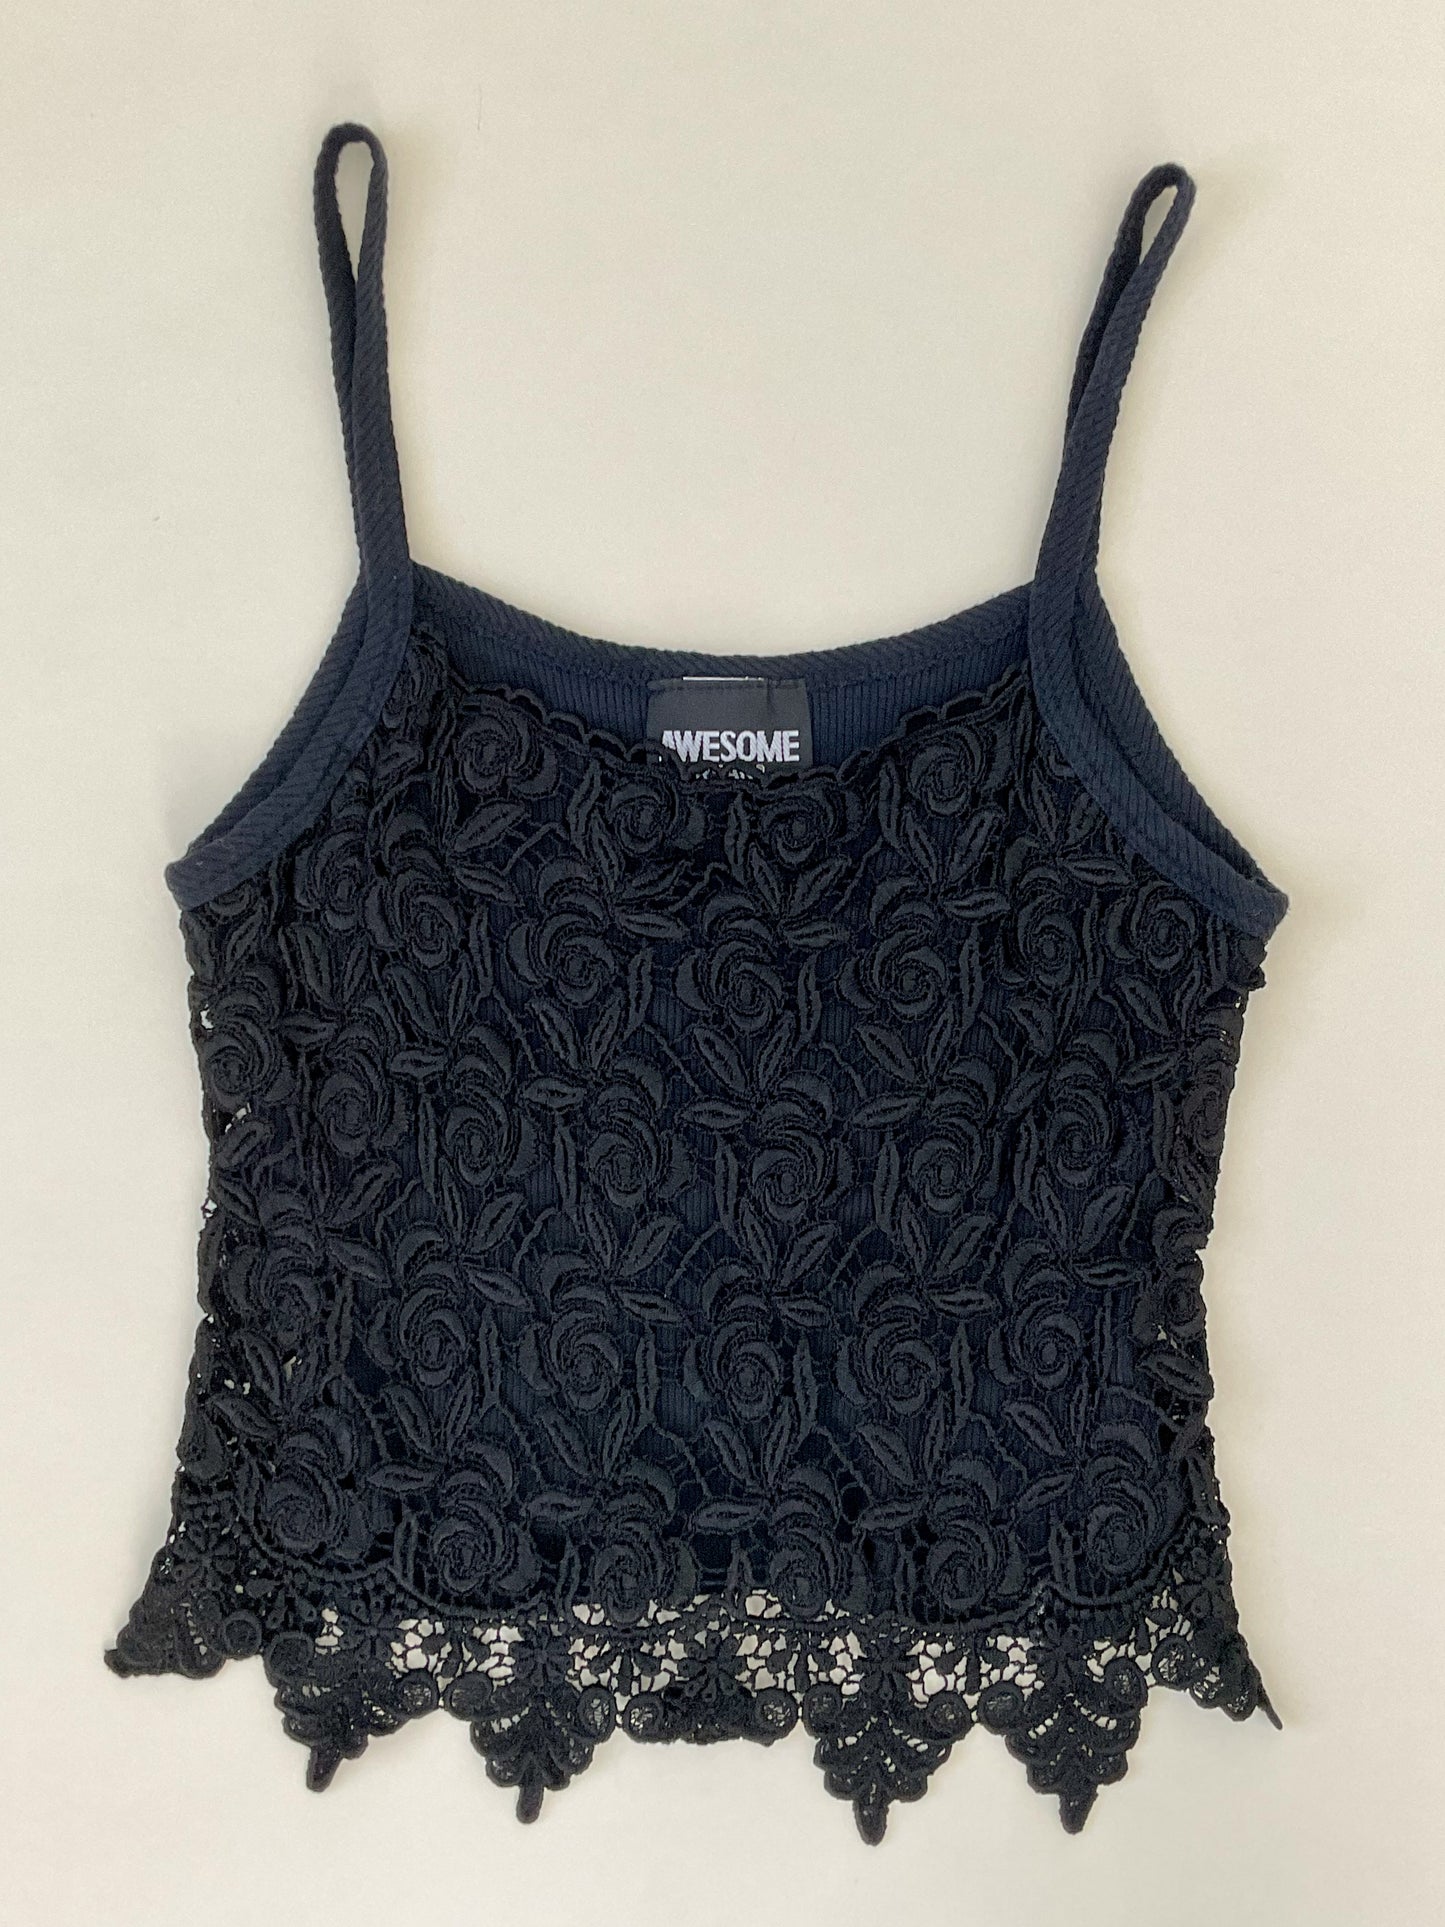 Vintage Lace "awesome" tank